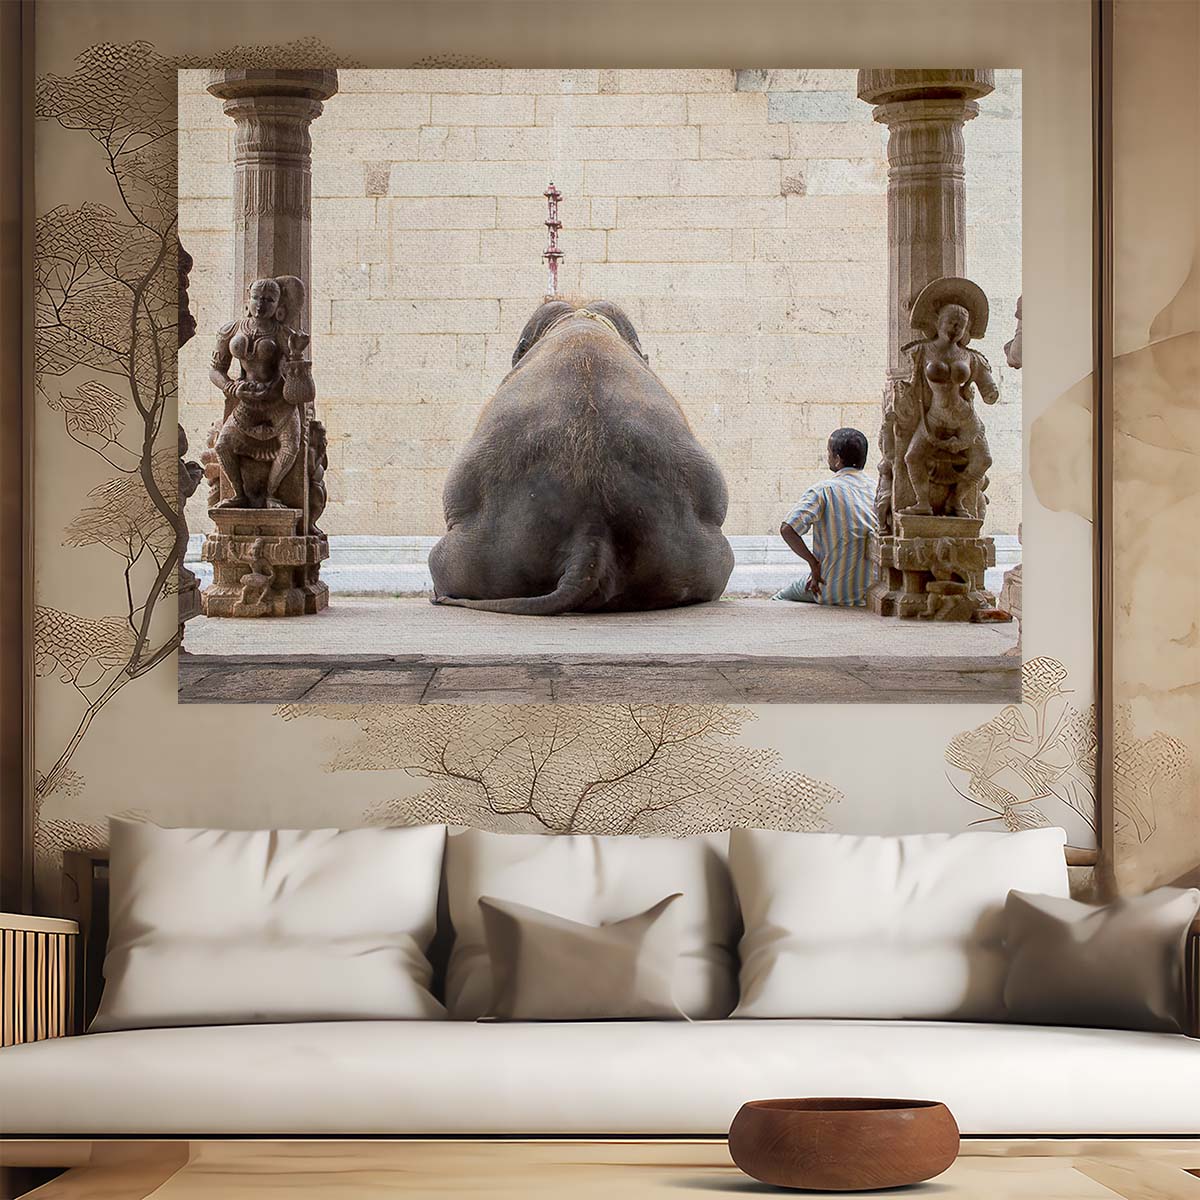 Sacred Elephant Temple Zen Meditation Wall Art by Luxuriance Designs. Made in USA.